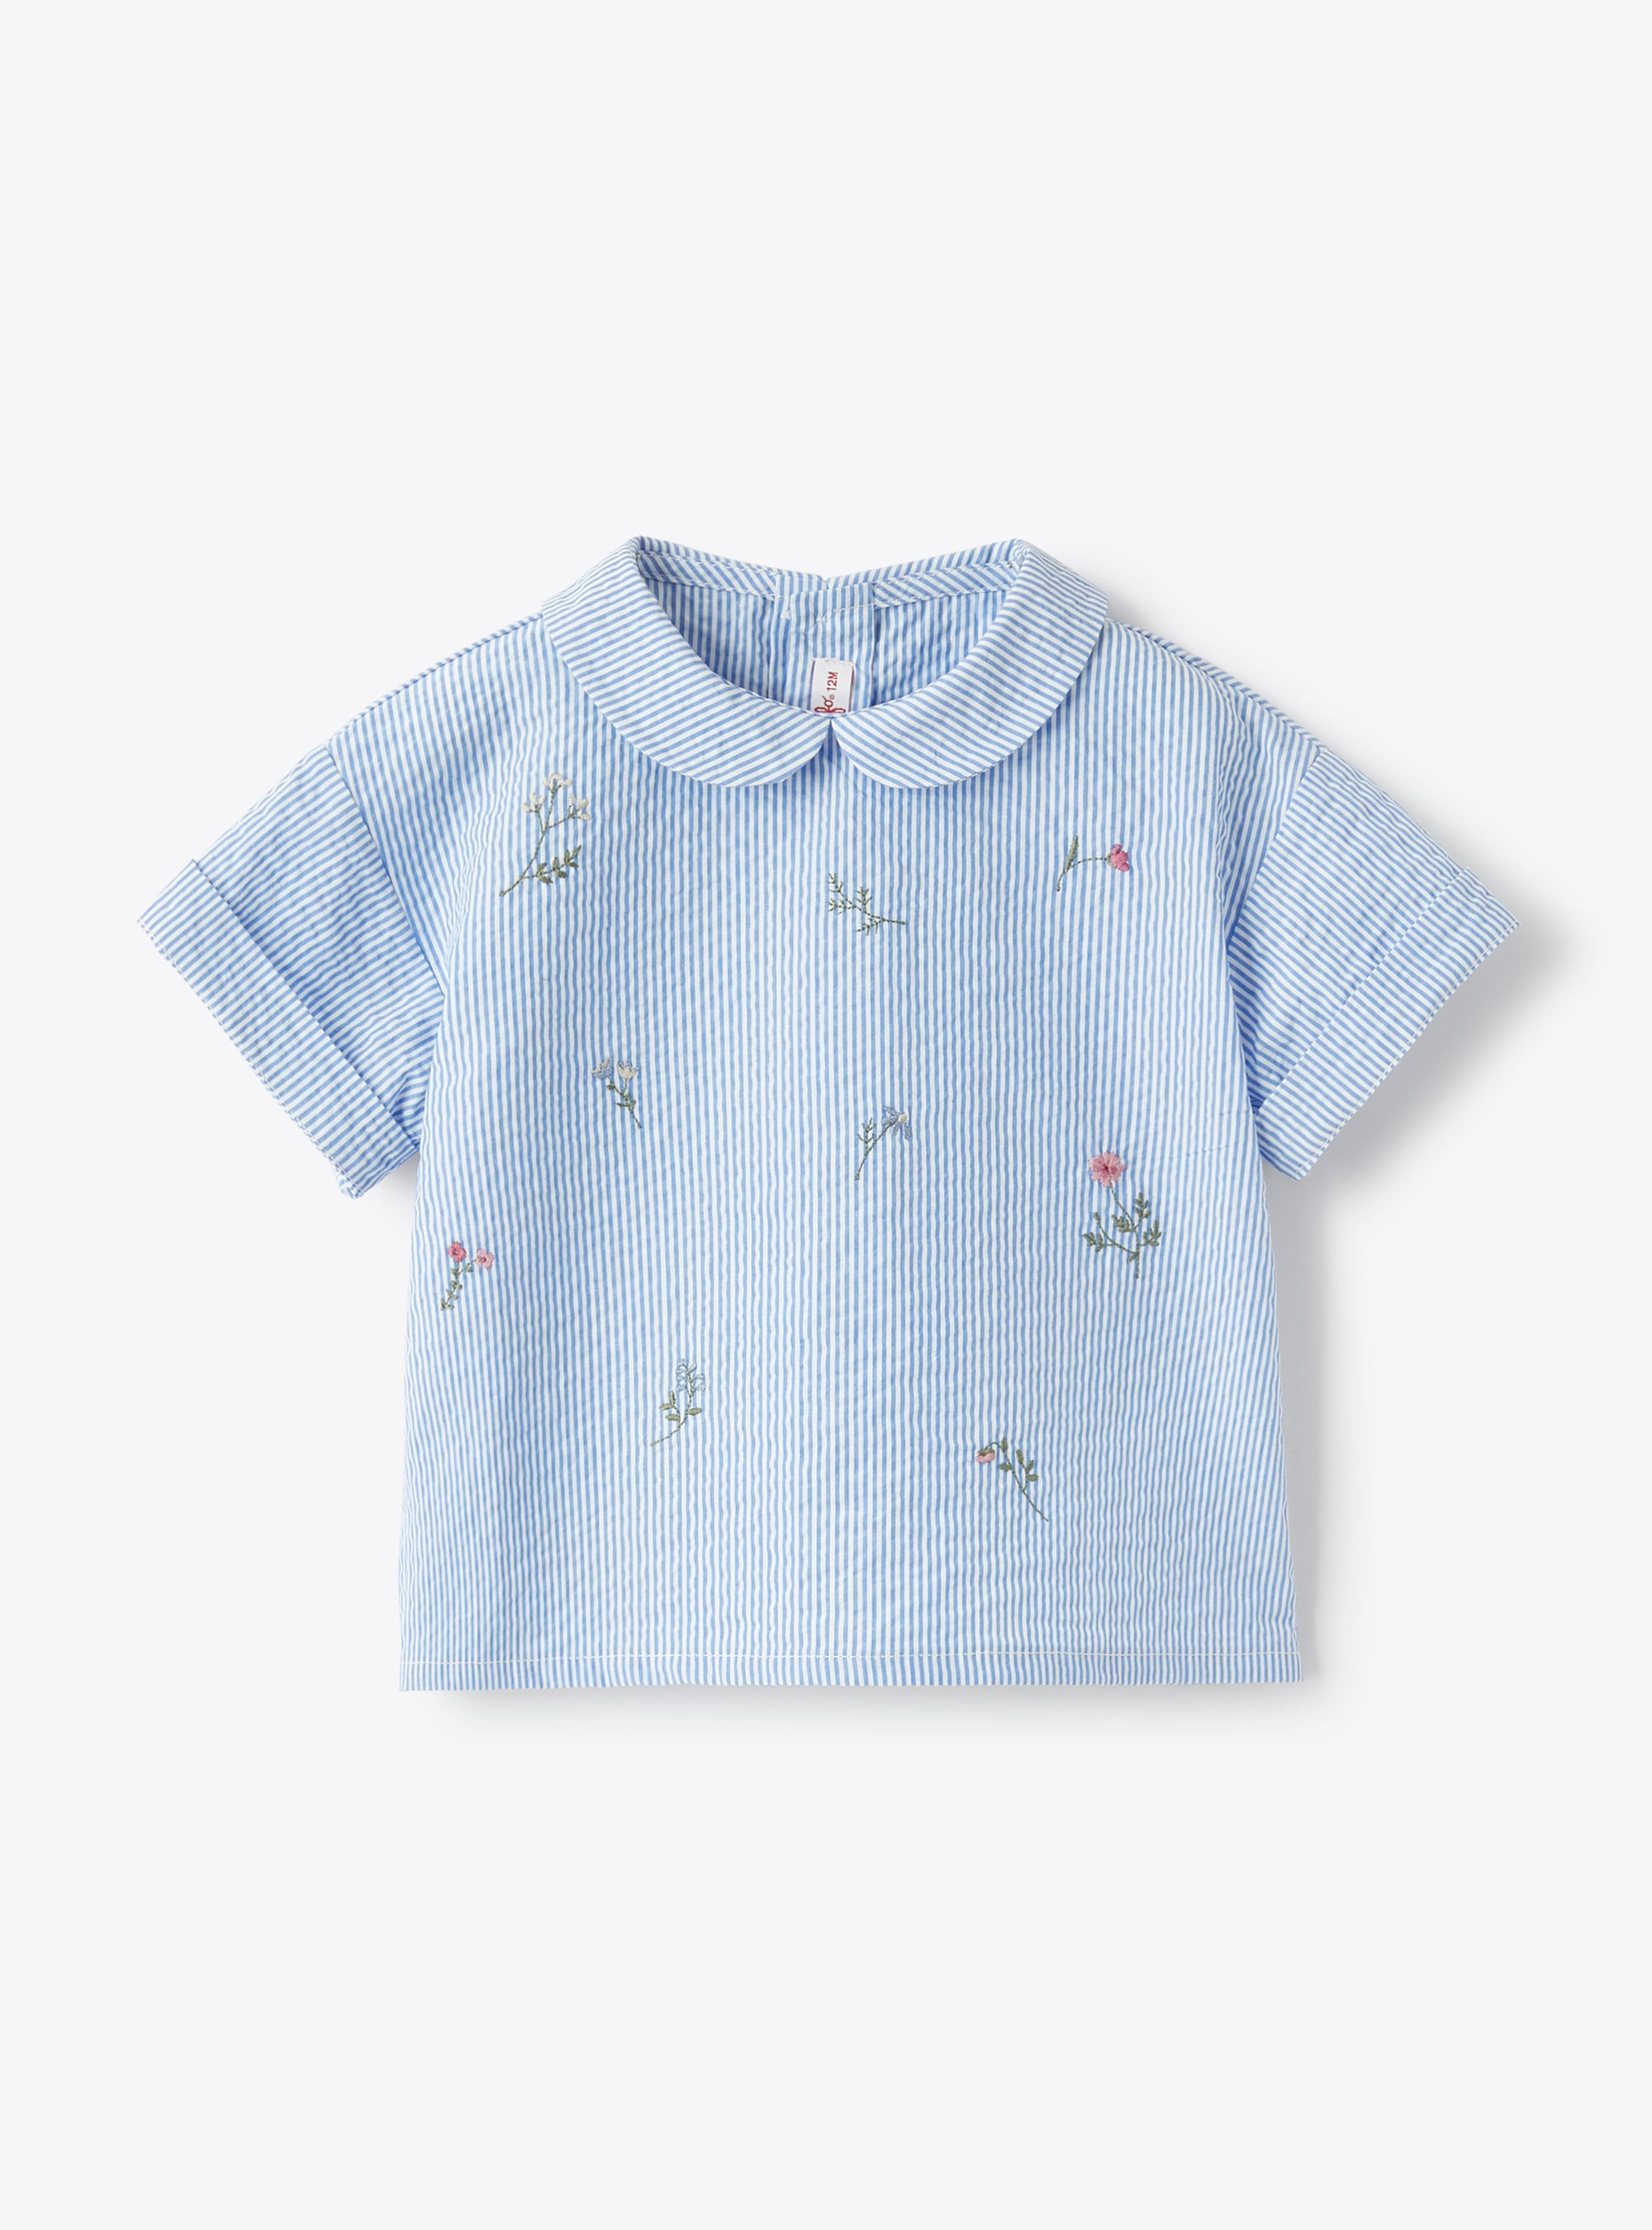 Seersucker shirt with embroidered floral details - Shirts - Il Gufo